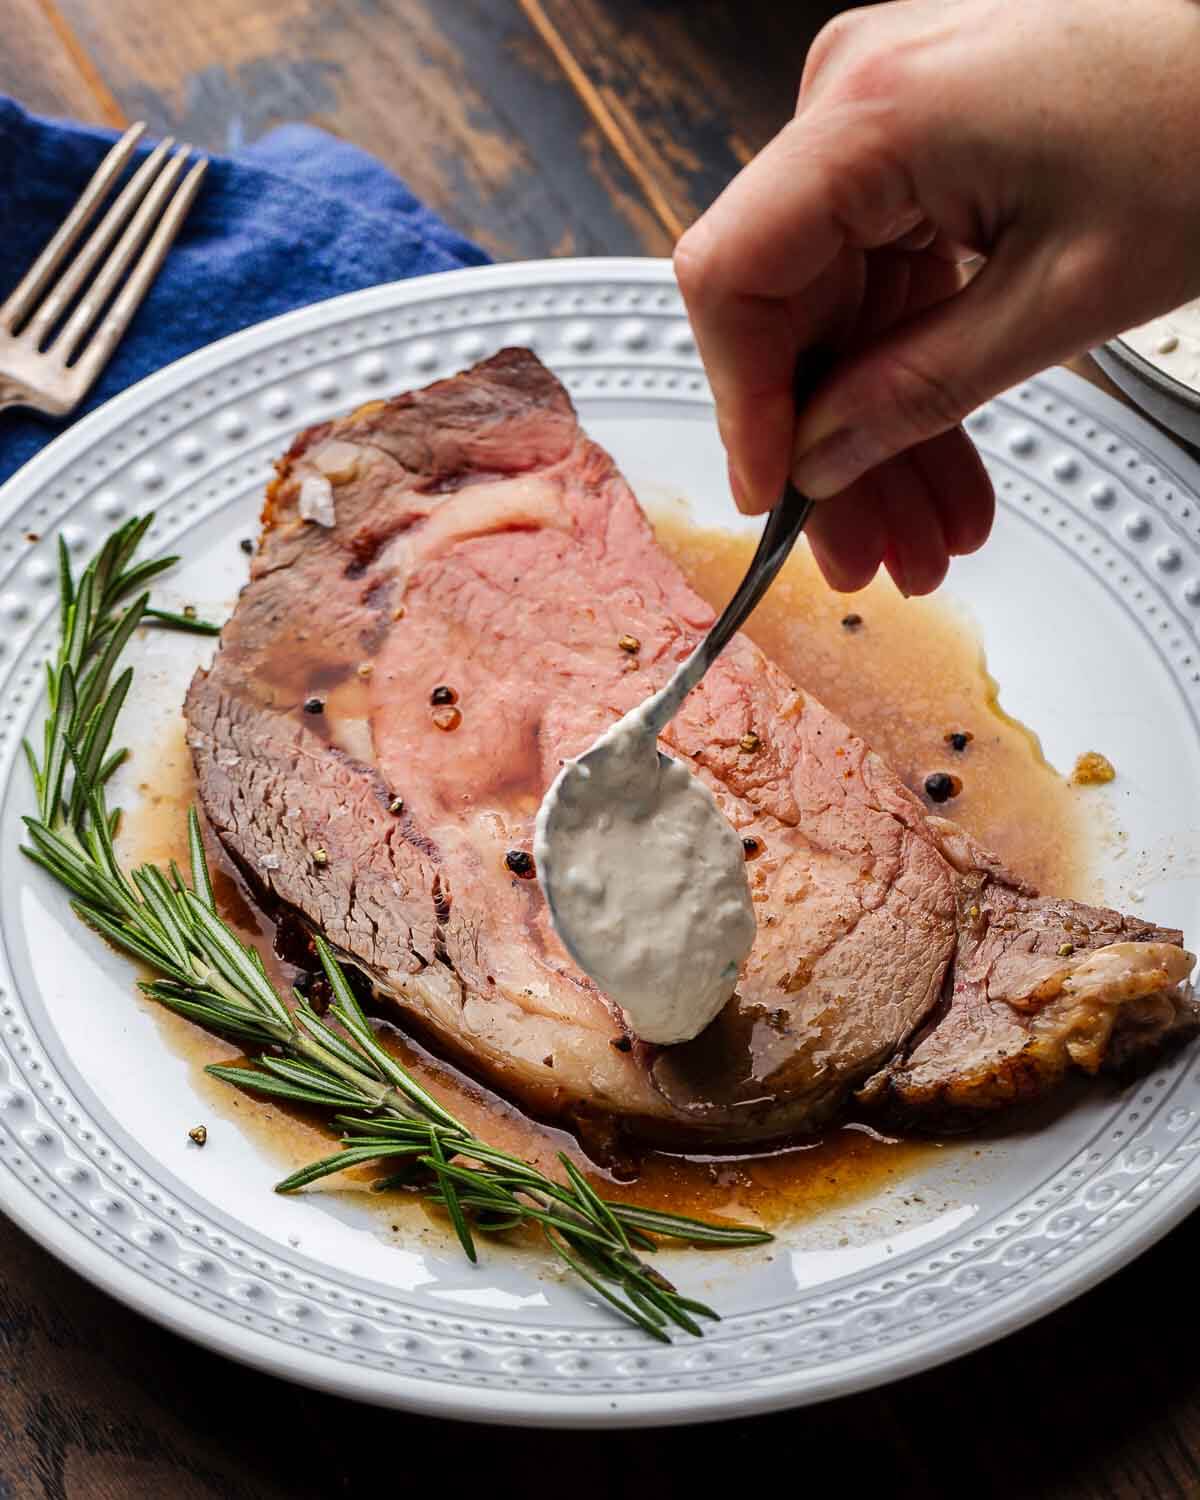 Hands spooning horseradish sauce onto a slice of prime rib in white plate.